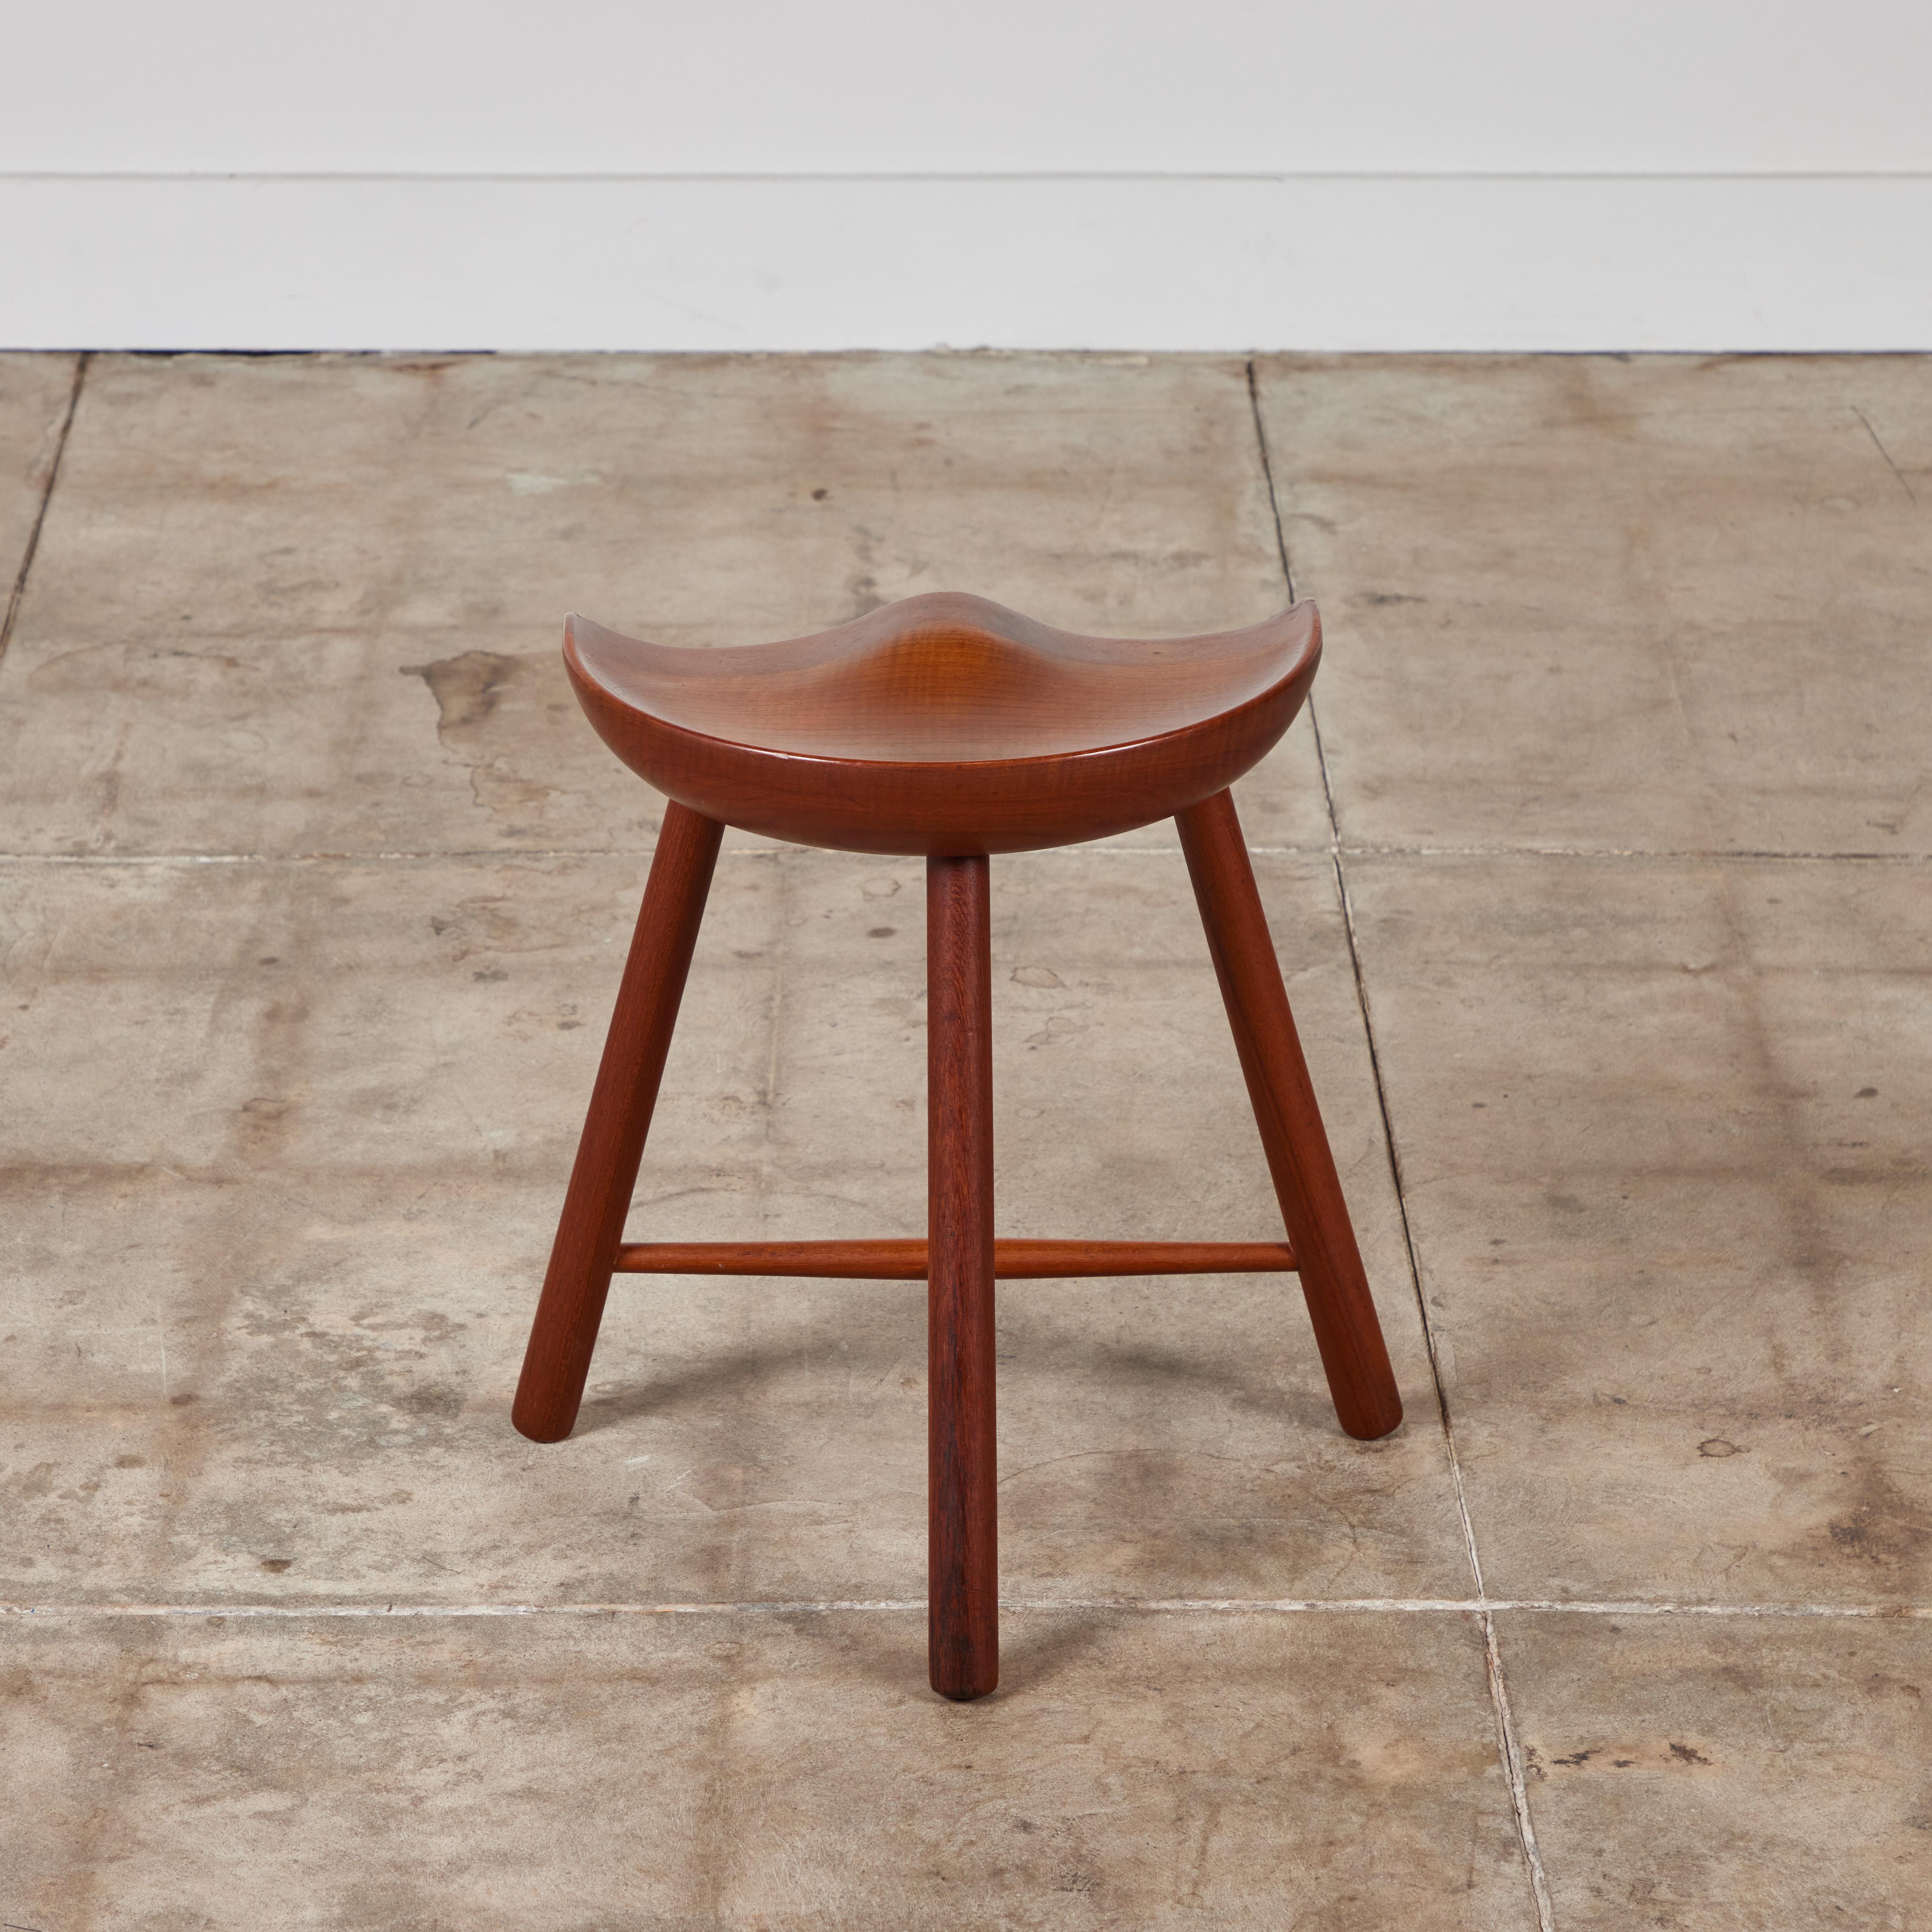 Teak Tripod Milking Stool In Good Condition For Sale In Los Angeles, CA